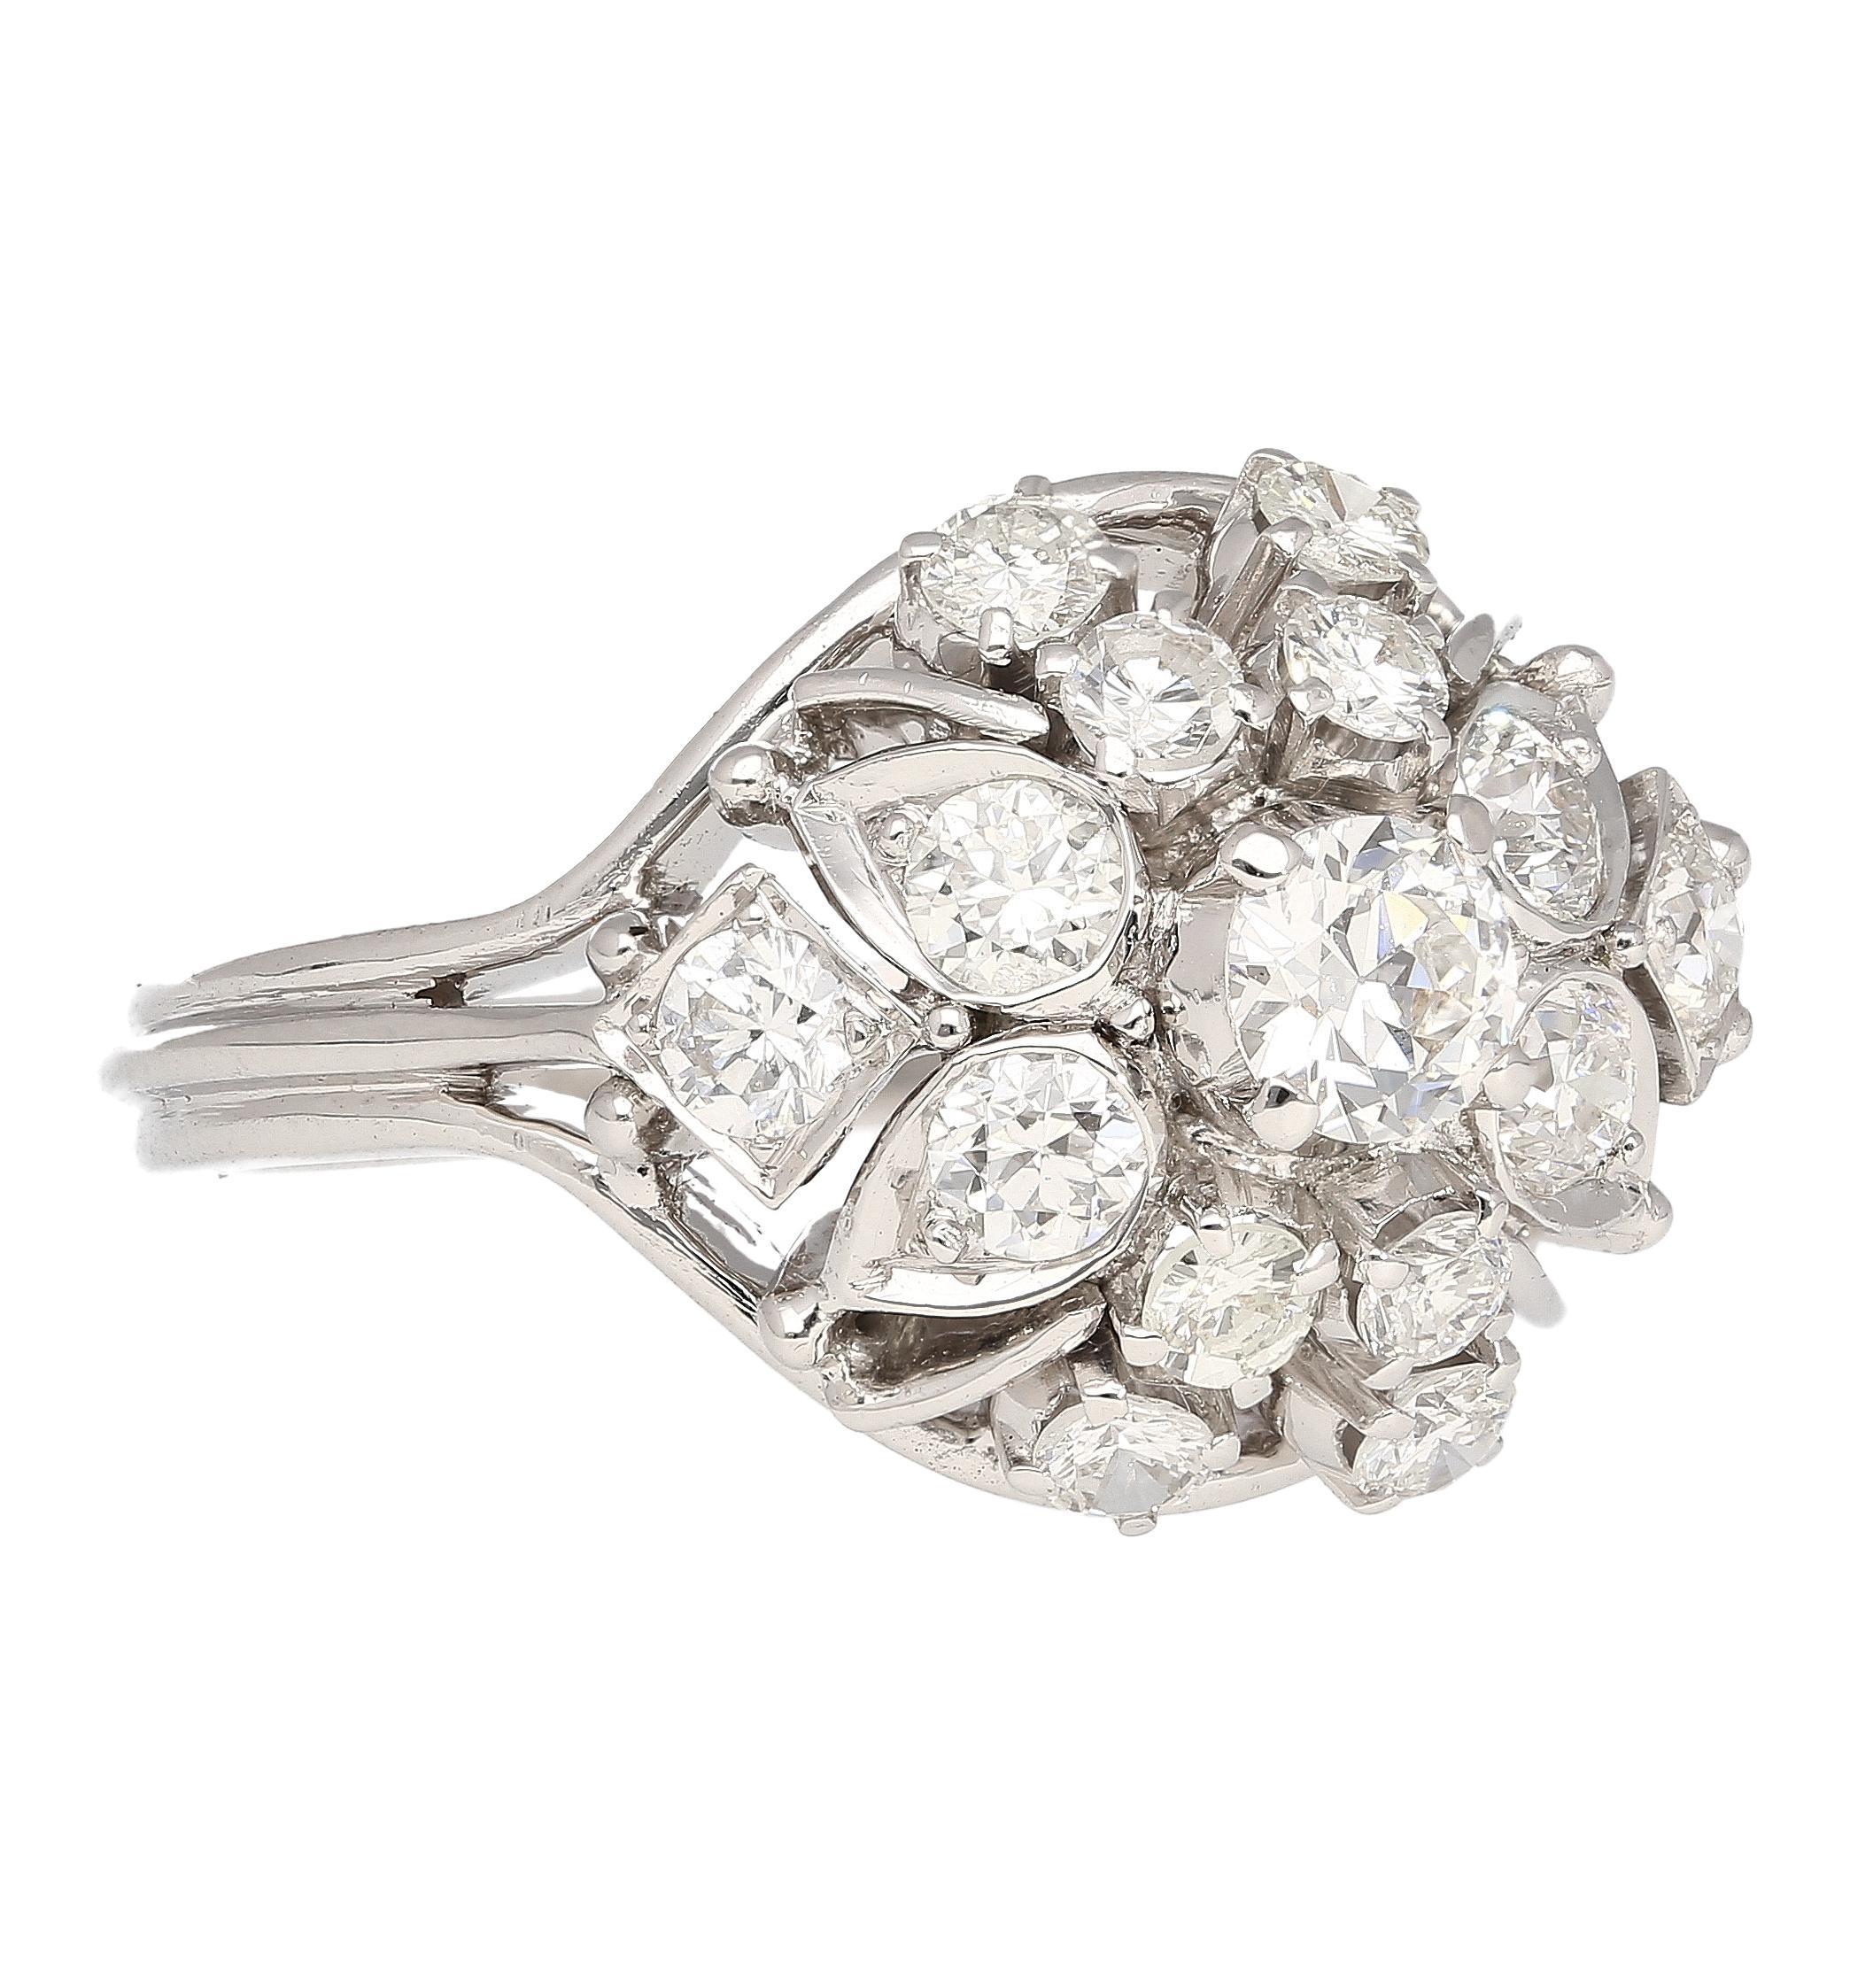 Old European Cut Vintage 1.30 Carat Old Euro-Cut Diamond Flower Ring in 14k White Gold For Sale